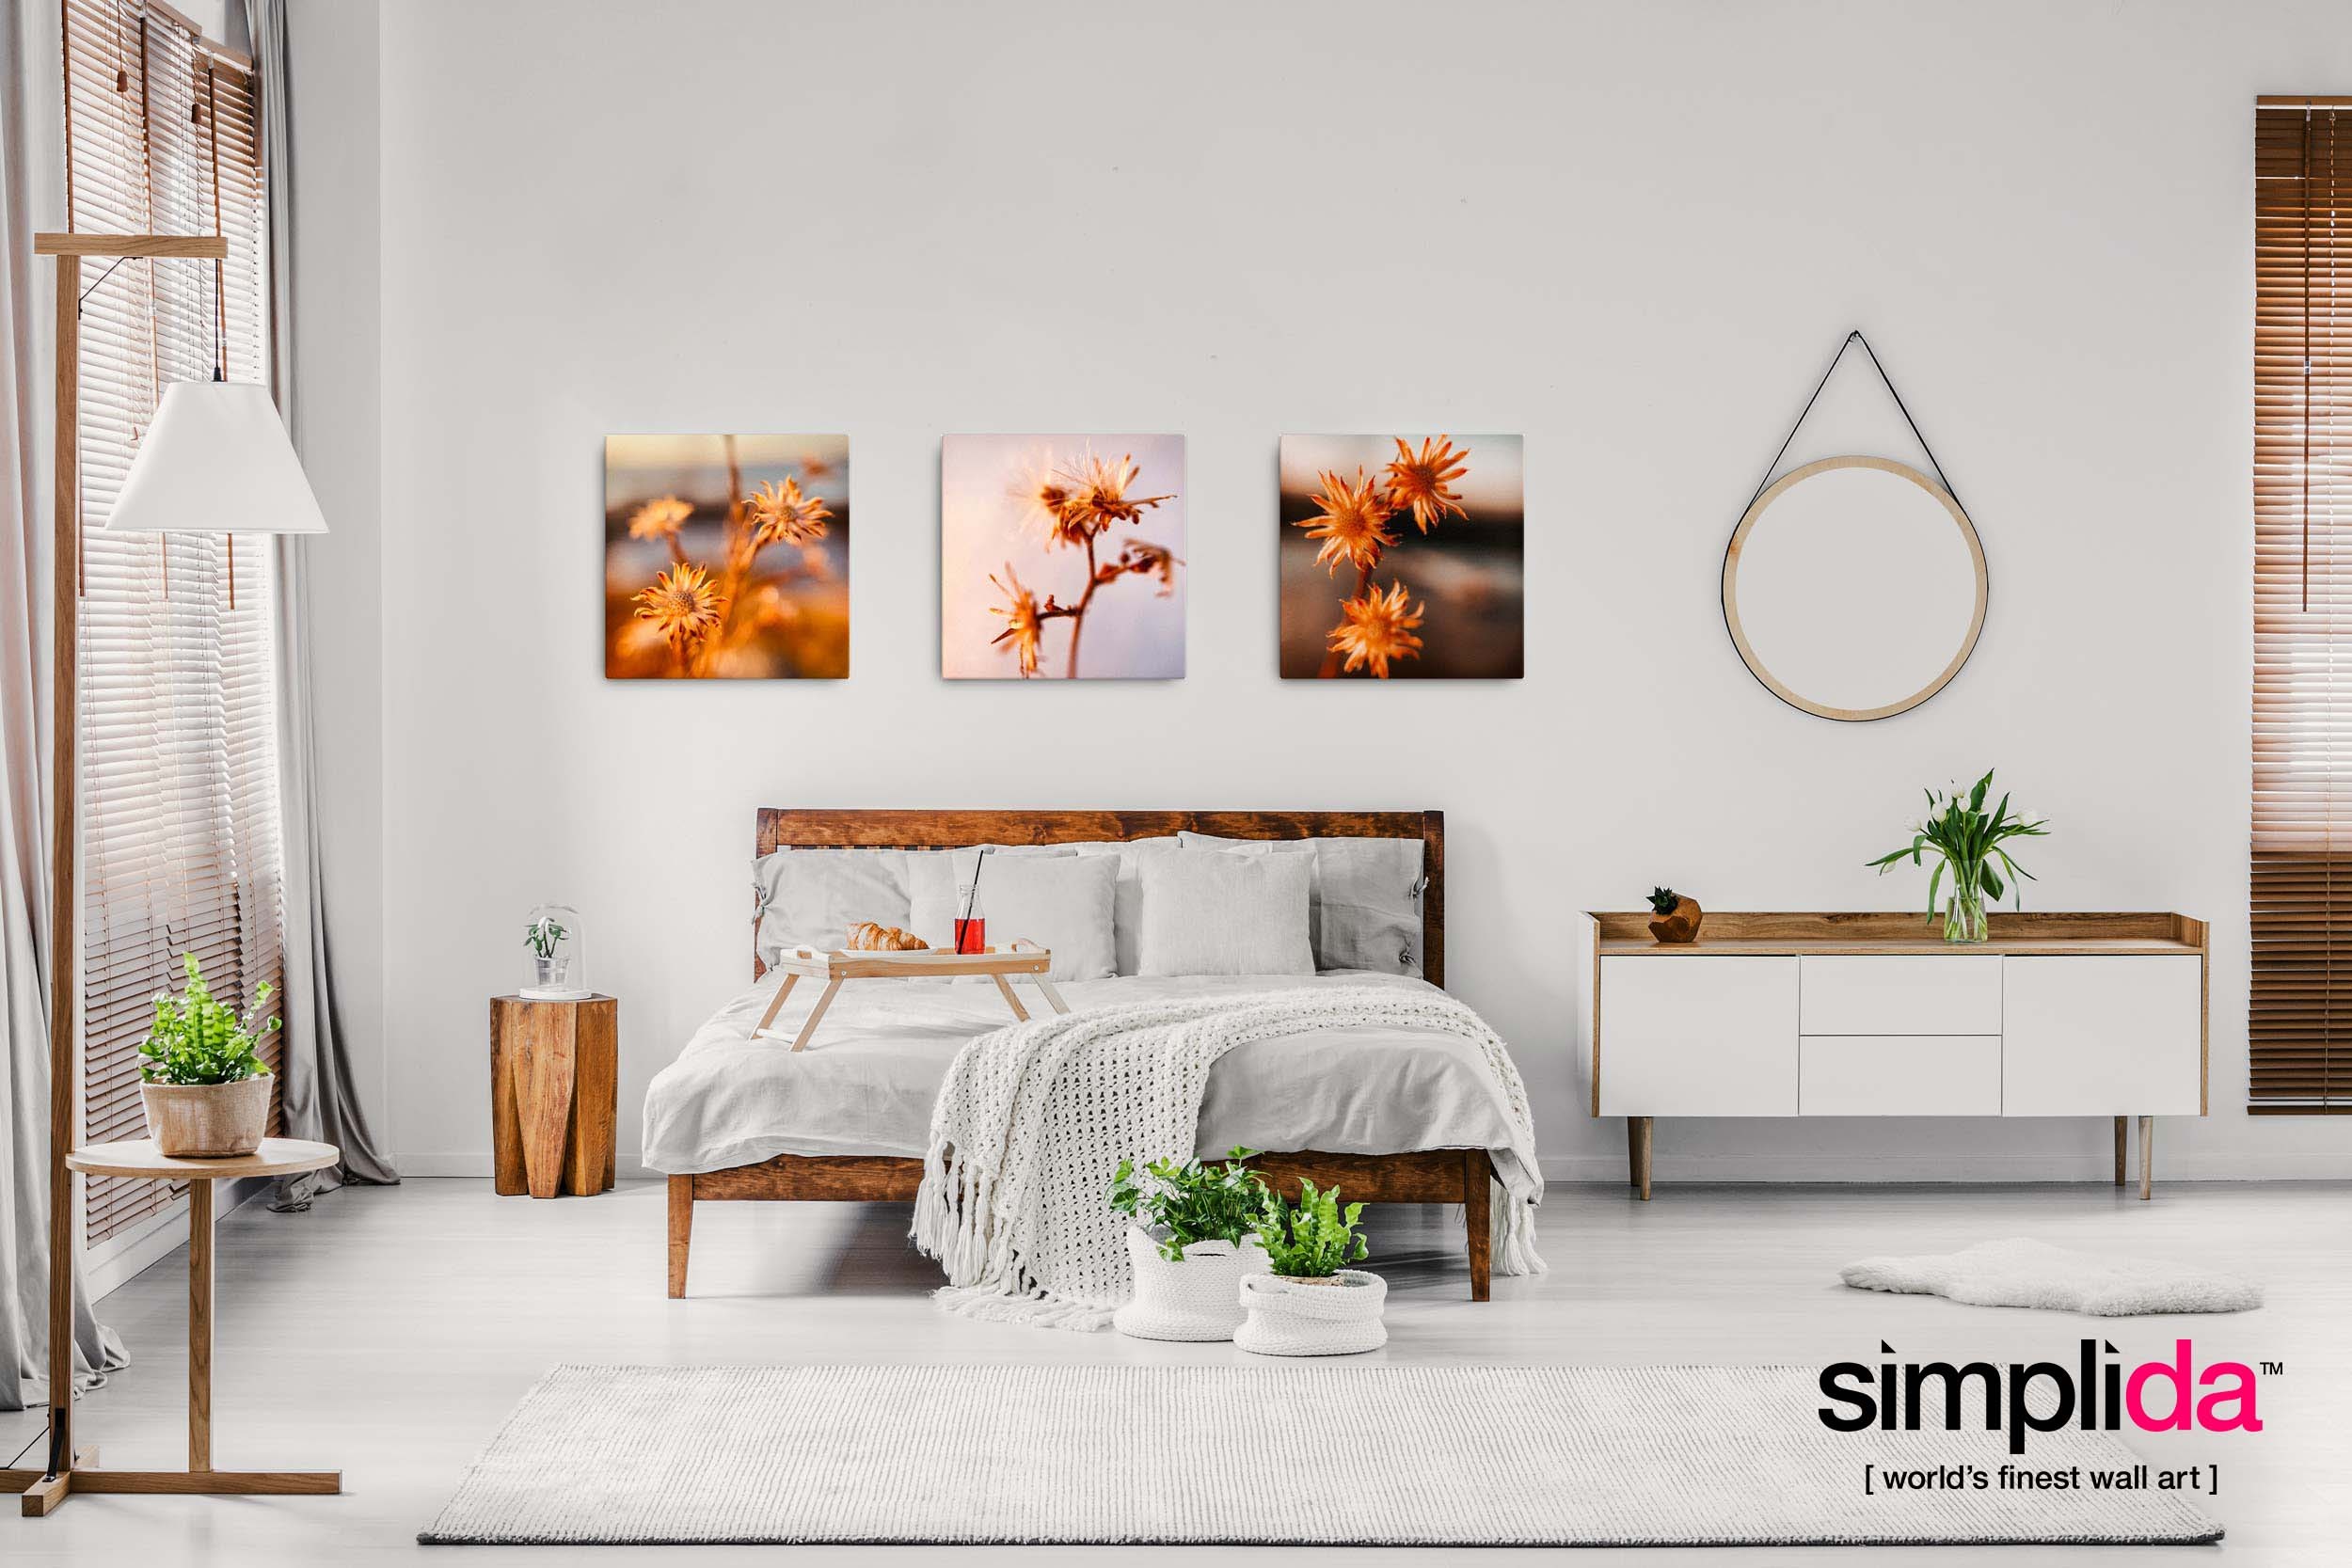 How to Improve Your Interior Design with Strategically Arranged Wall Art